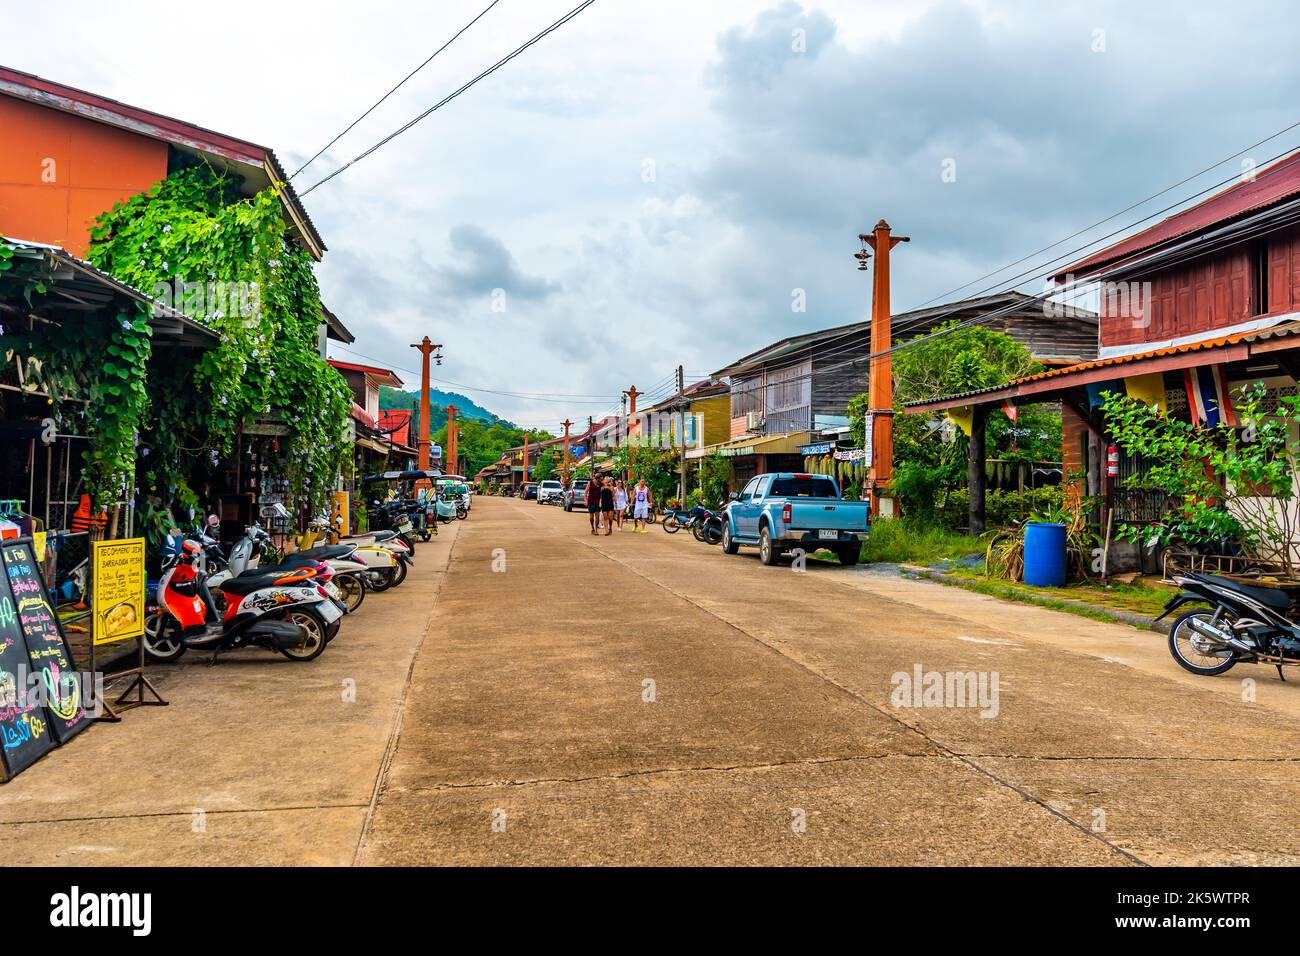 Koh Lanta, Thailand - 10.11.2019: City street of the Ko Lanta Old Town. Street with small famous shops, restaurants and other retail store. Historical Stock Photo